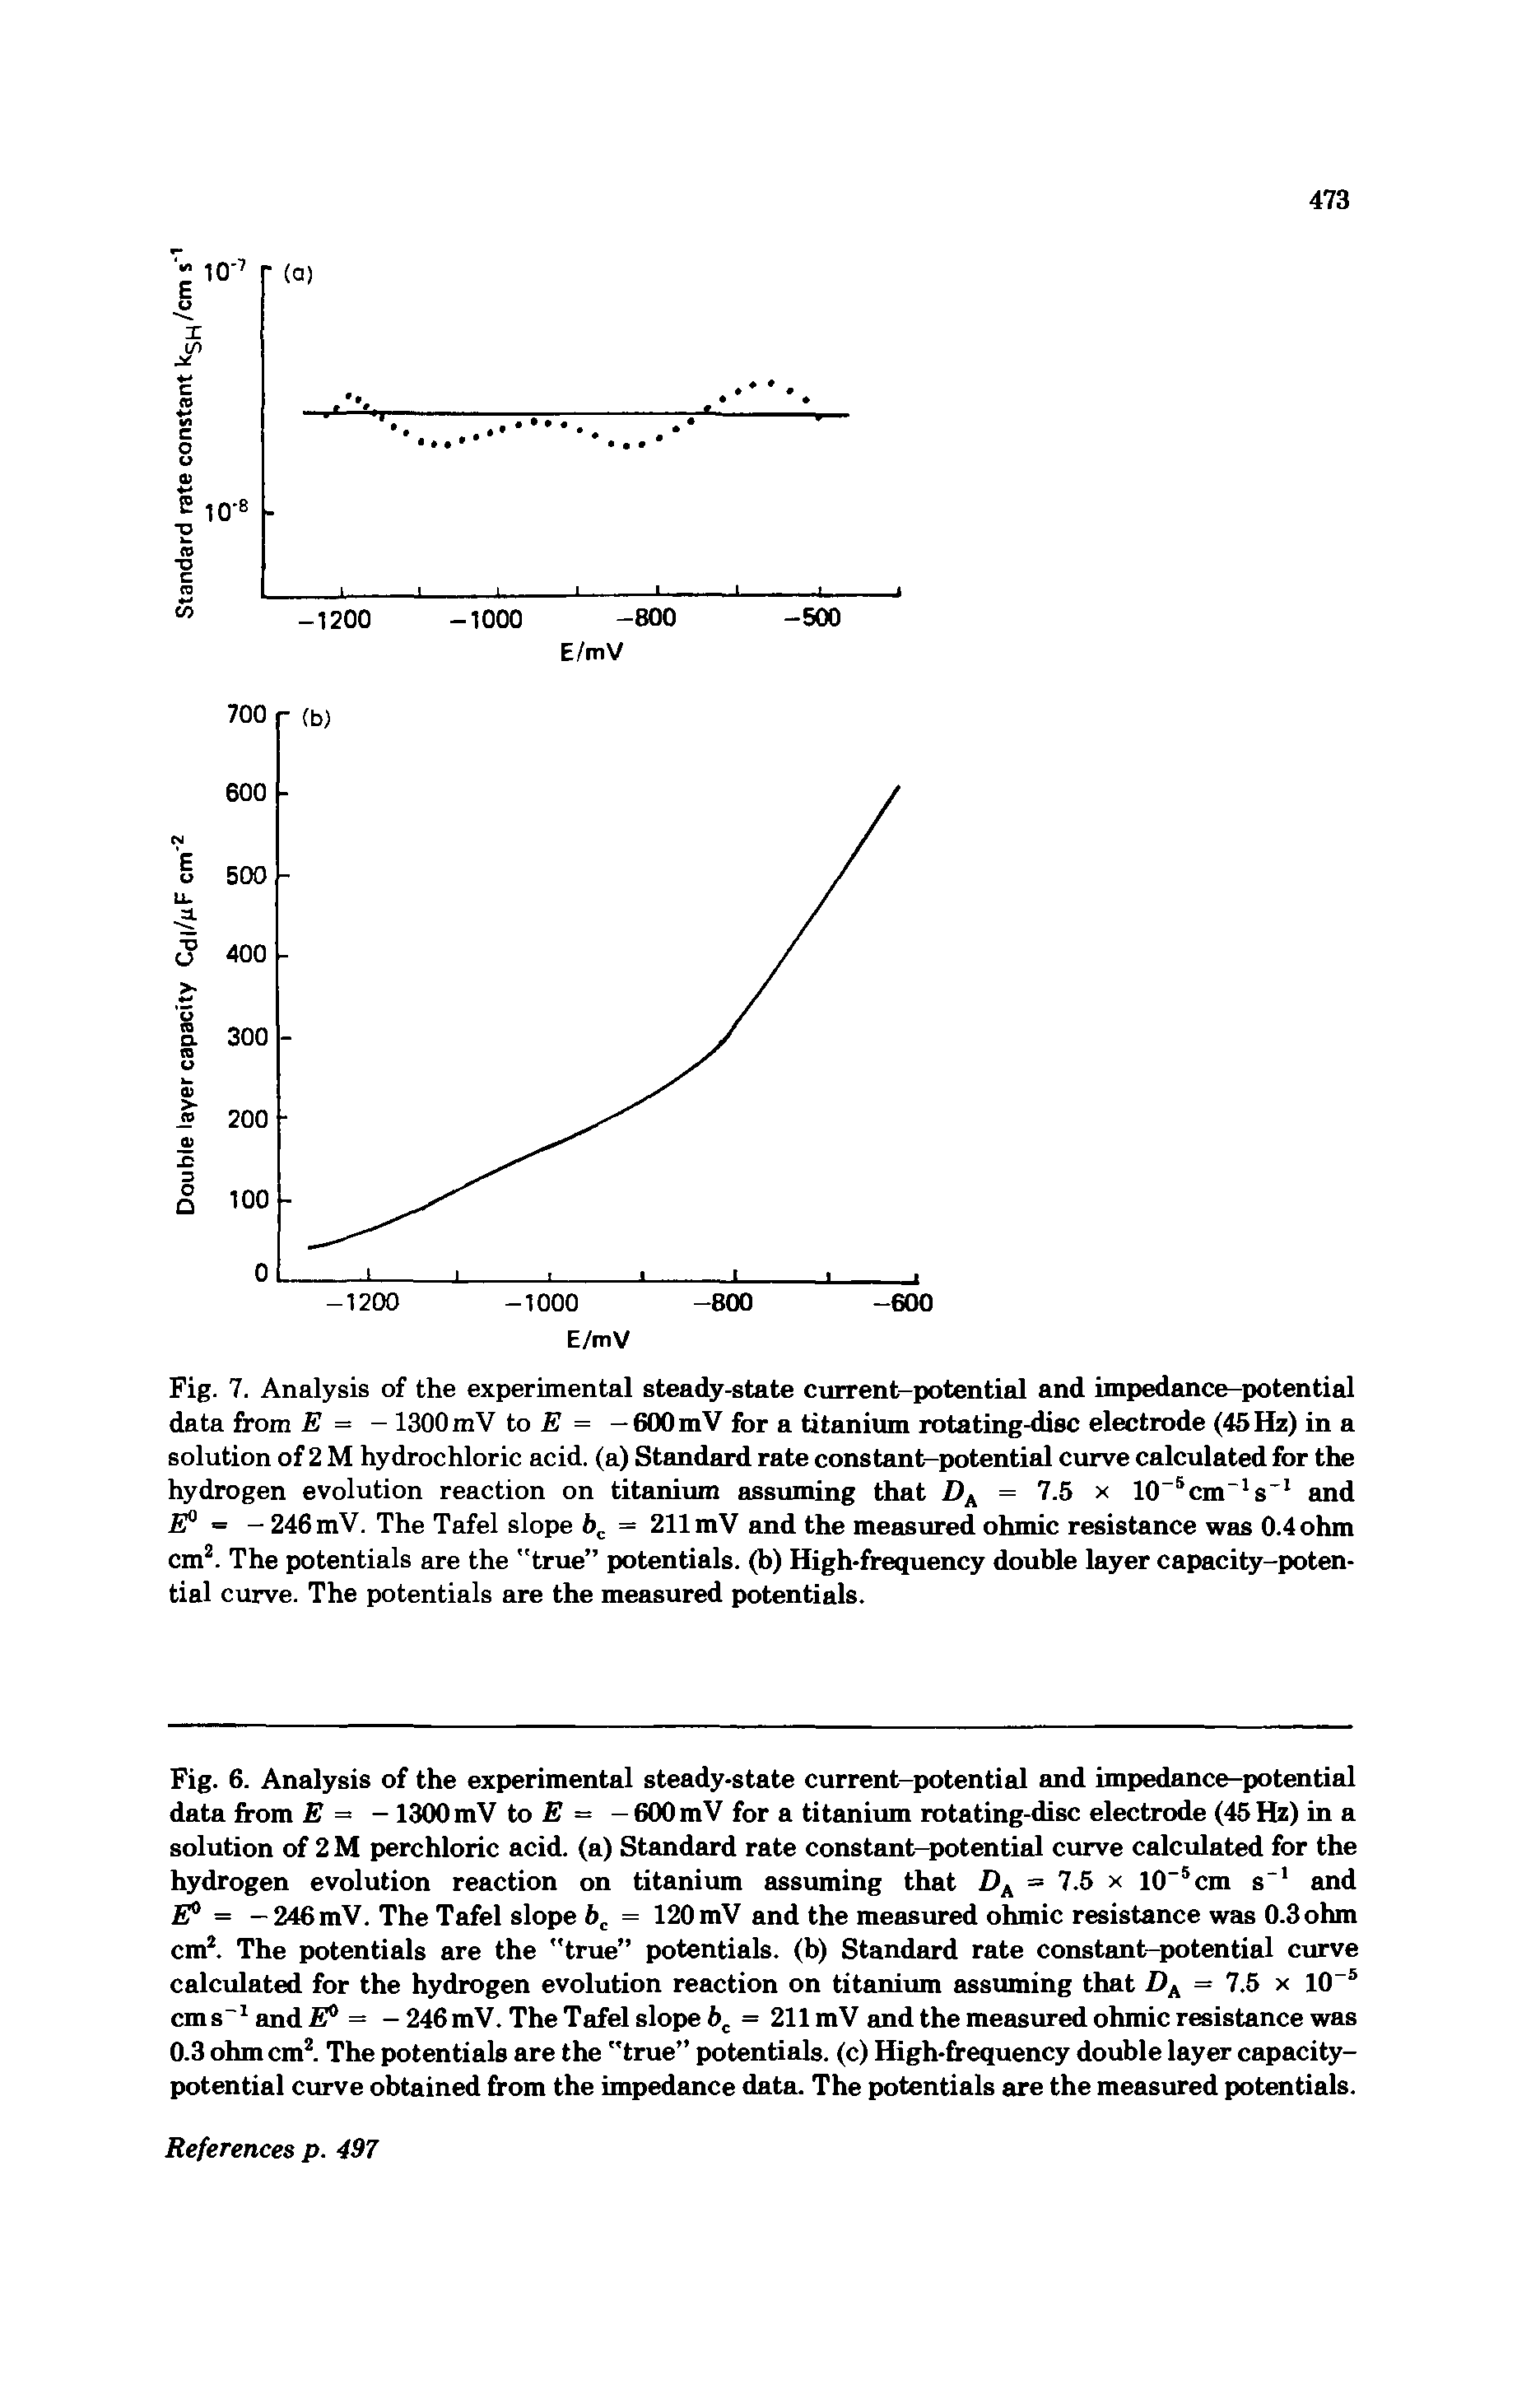 Fig. 7. Analysis of the experimental steady-state current-potential and impedance-potential data from E = - 1300 mV to E = — 600 mV for a titanium rotating-disc electrode (45 Hz) in a solution of 2 M hydrochloric acid, (a) Standard rate constant-potential curve calculated for the hydrogen evolution reaction on titanium assuming that DA = 7.5 x 10 5cm"1s 1 and E° = - 246 mV. The Tafel slope 6C = 211 mV and the measured ohmic resistance was 0.4 ohm cm2. The potentials are the "true potentials, (b) High-frequency double layer capacity-potential curve. The potentials are the measured potentials.